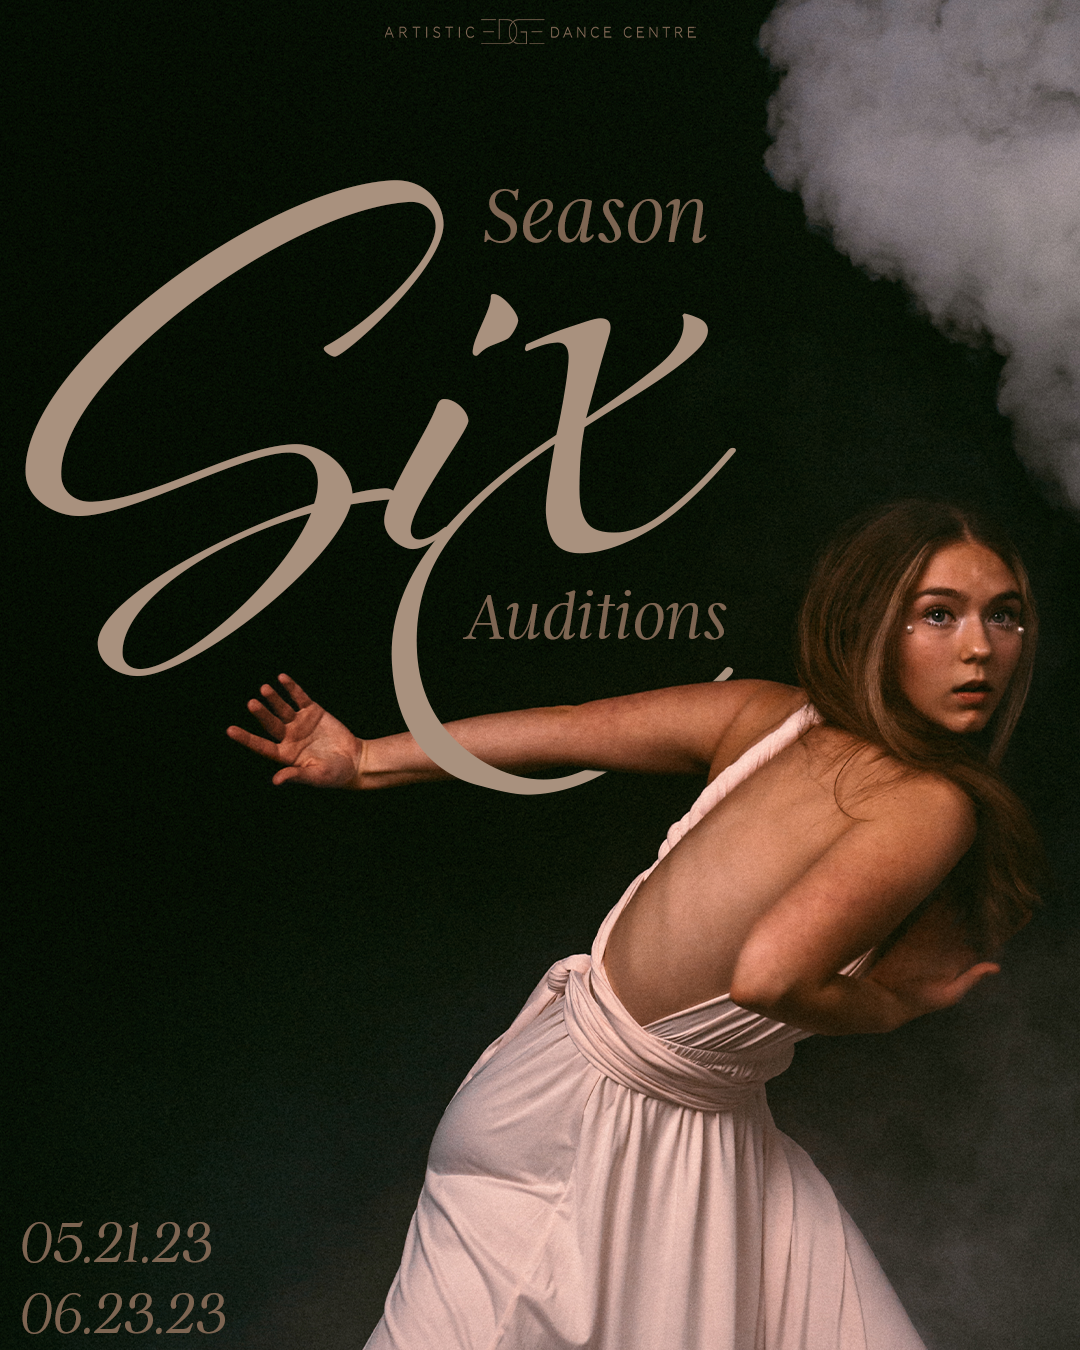 girl with brown hair dancing, black background with smoke, text reads 'Season Six Auditions' to promote audition dates for Artistic Edge Dance Centre